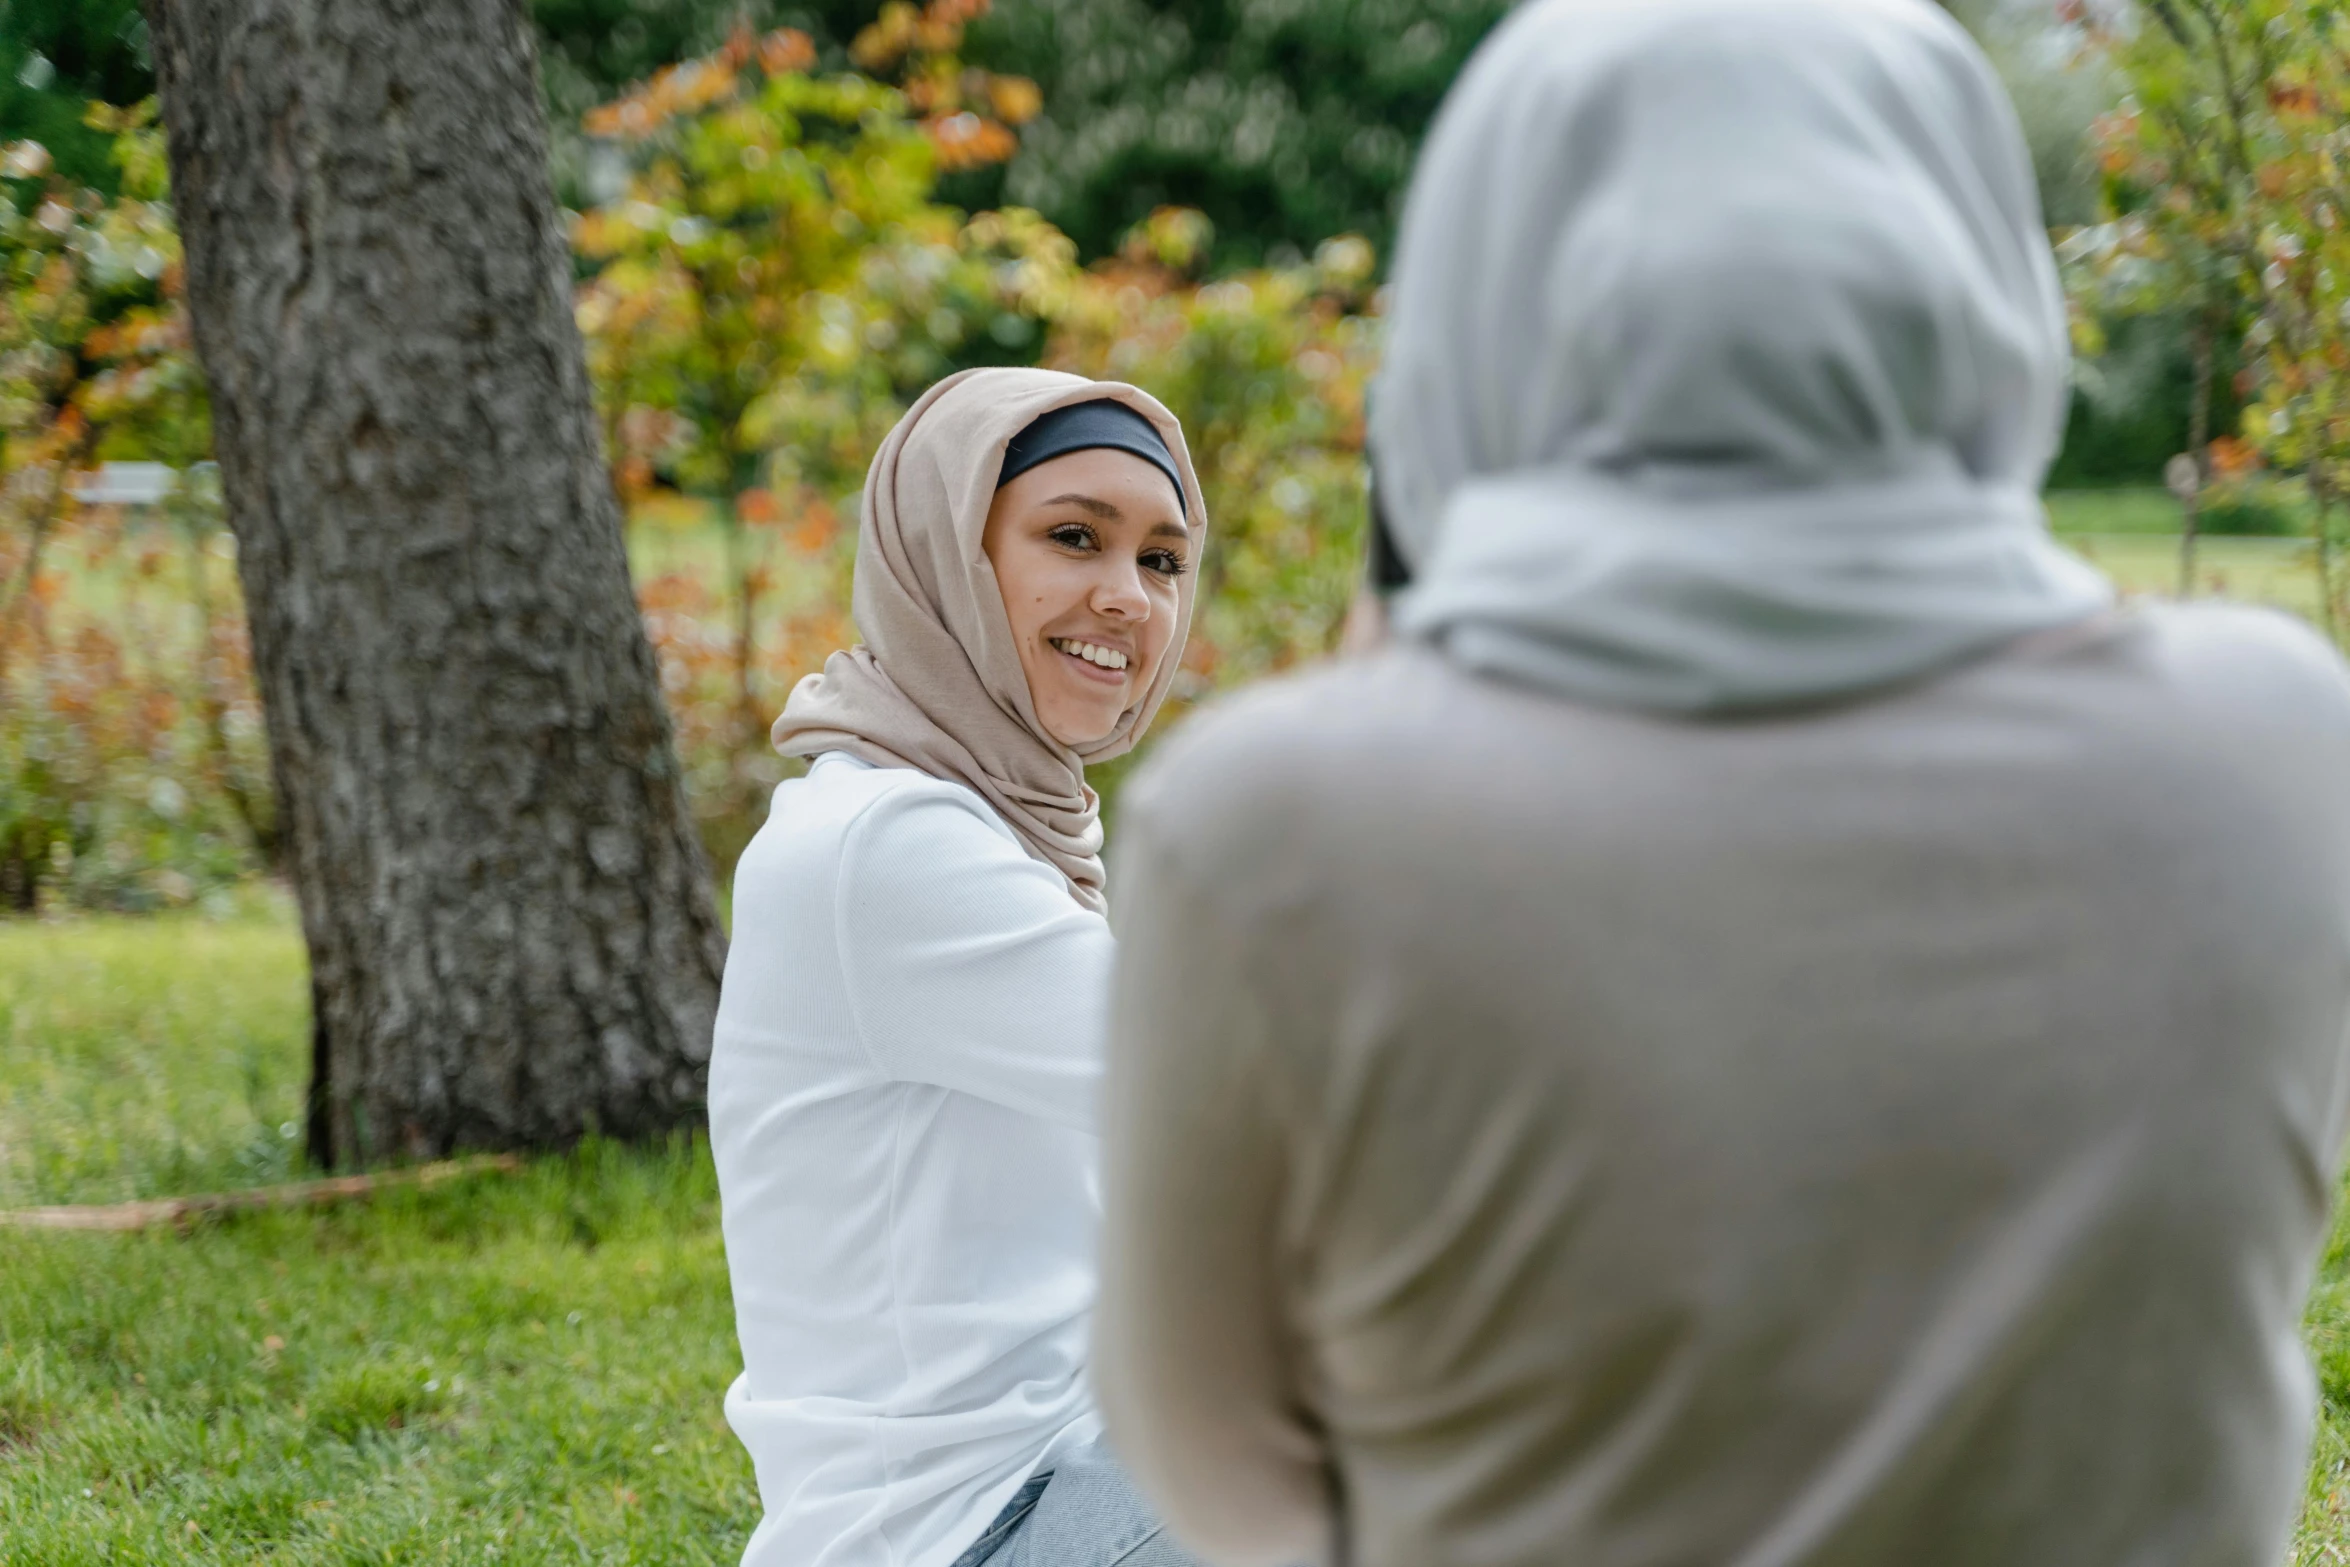 a woman in a headscarf smiles as she looks at another woman